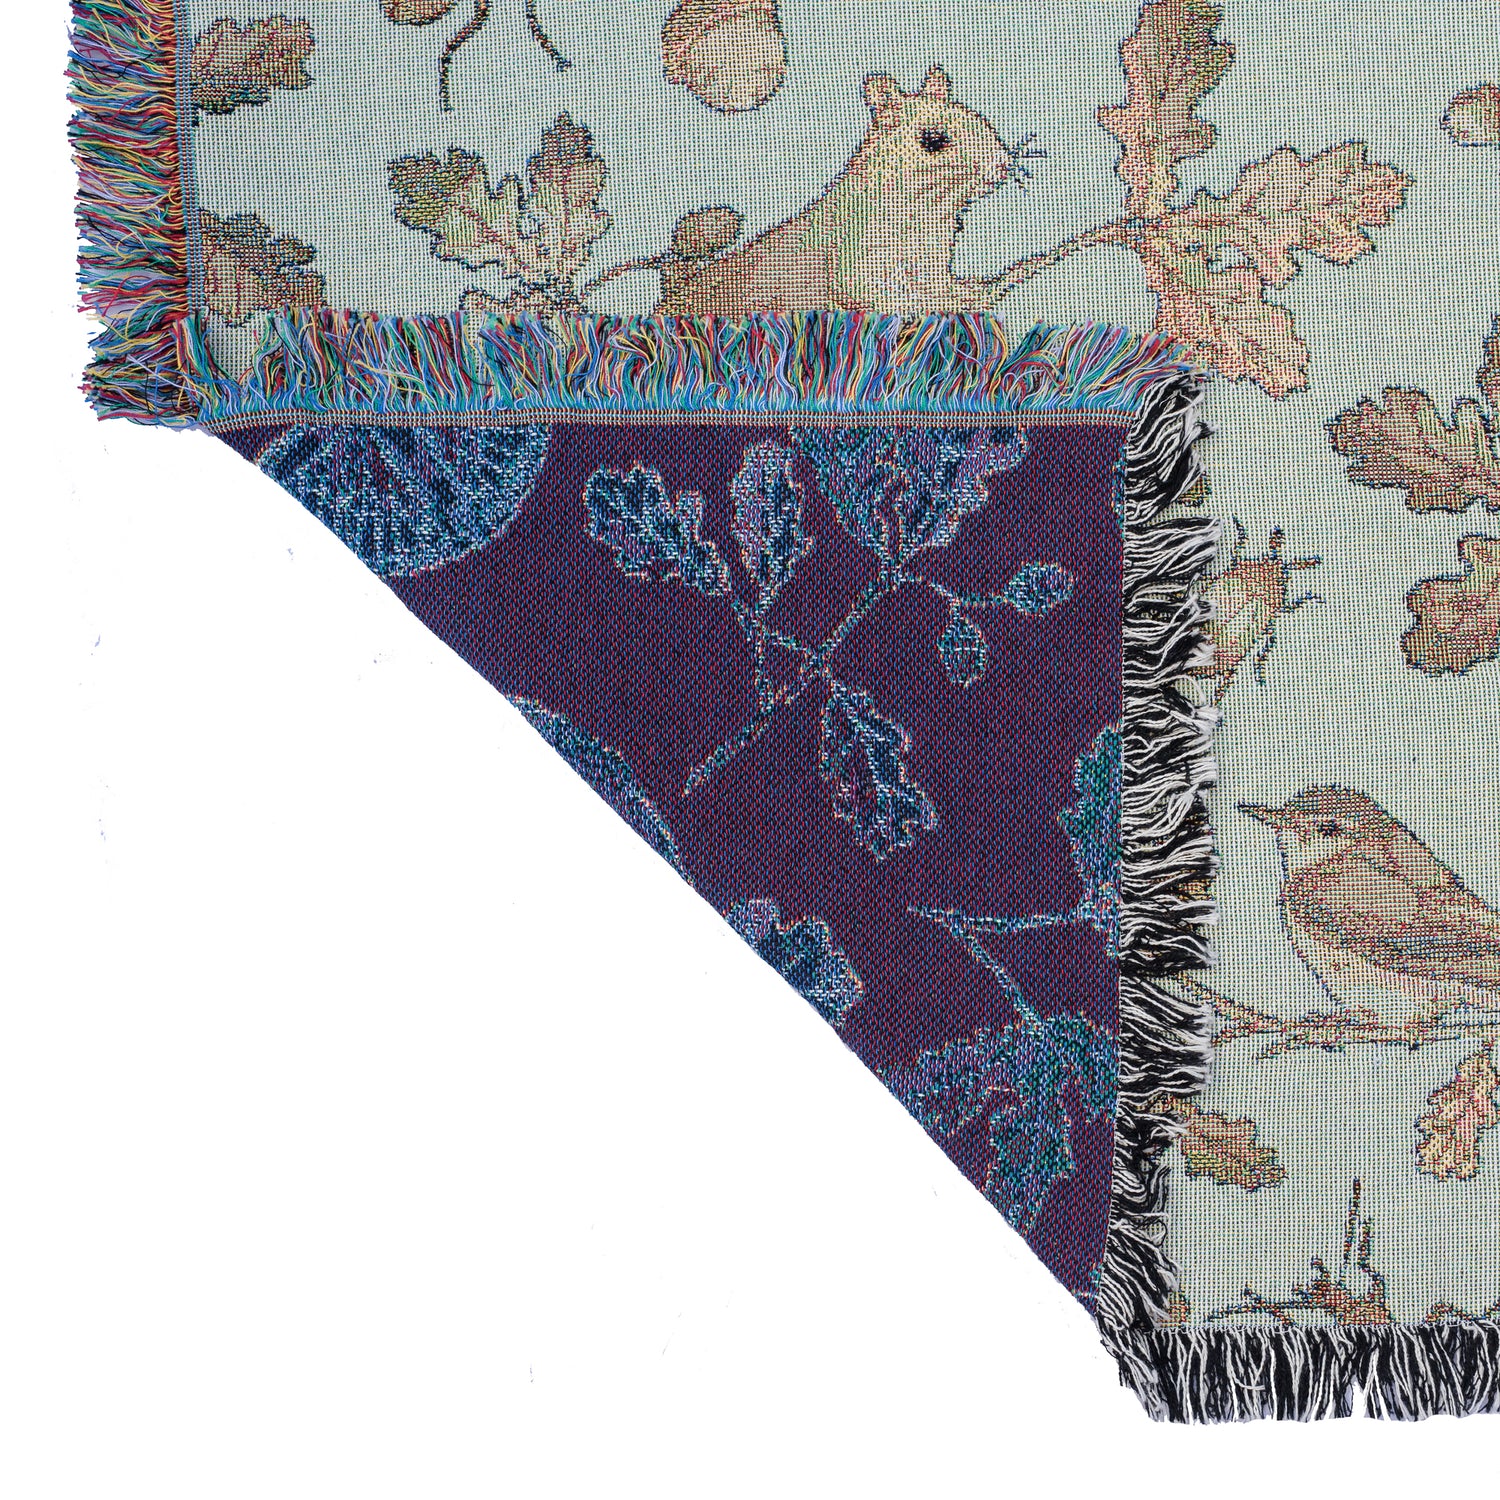 a blue and purple Wild Oak Wrap Blanket with birds and acorns on it, made by Arcana.